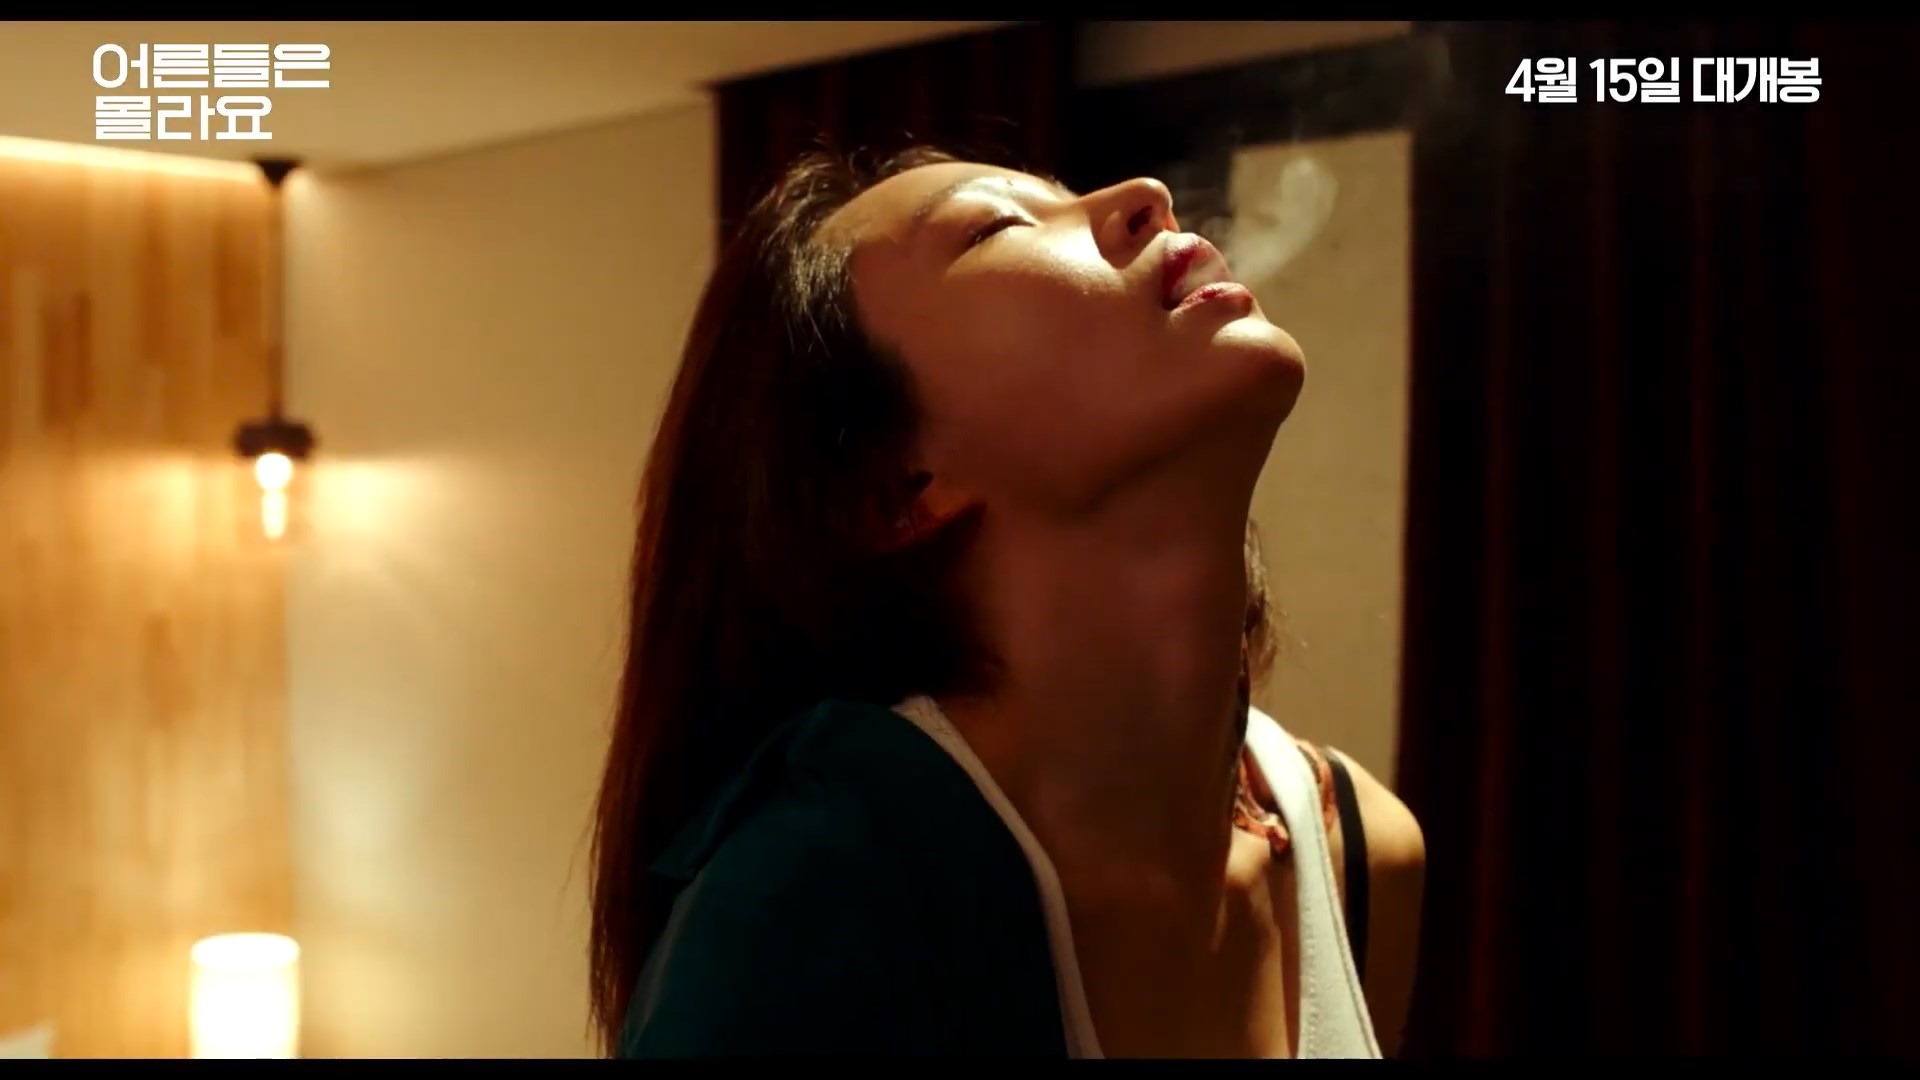 young-adult-matters-korean-movie-30s-trailer.mp4_snapshot_00.17.183